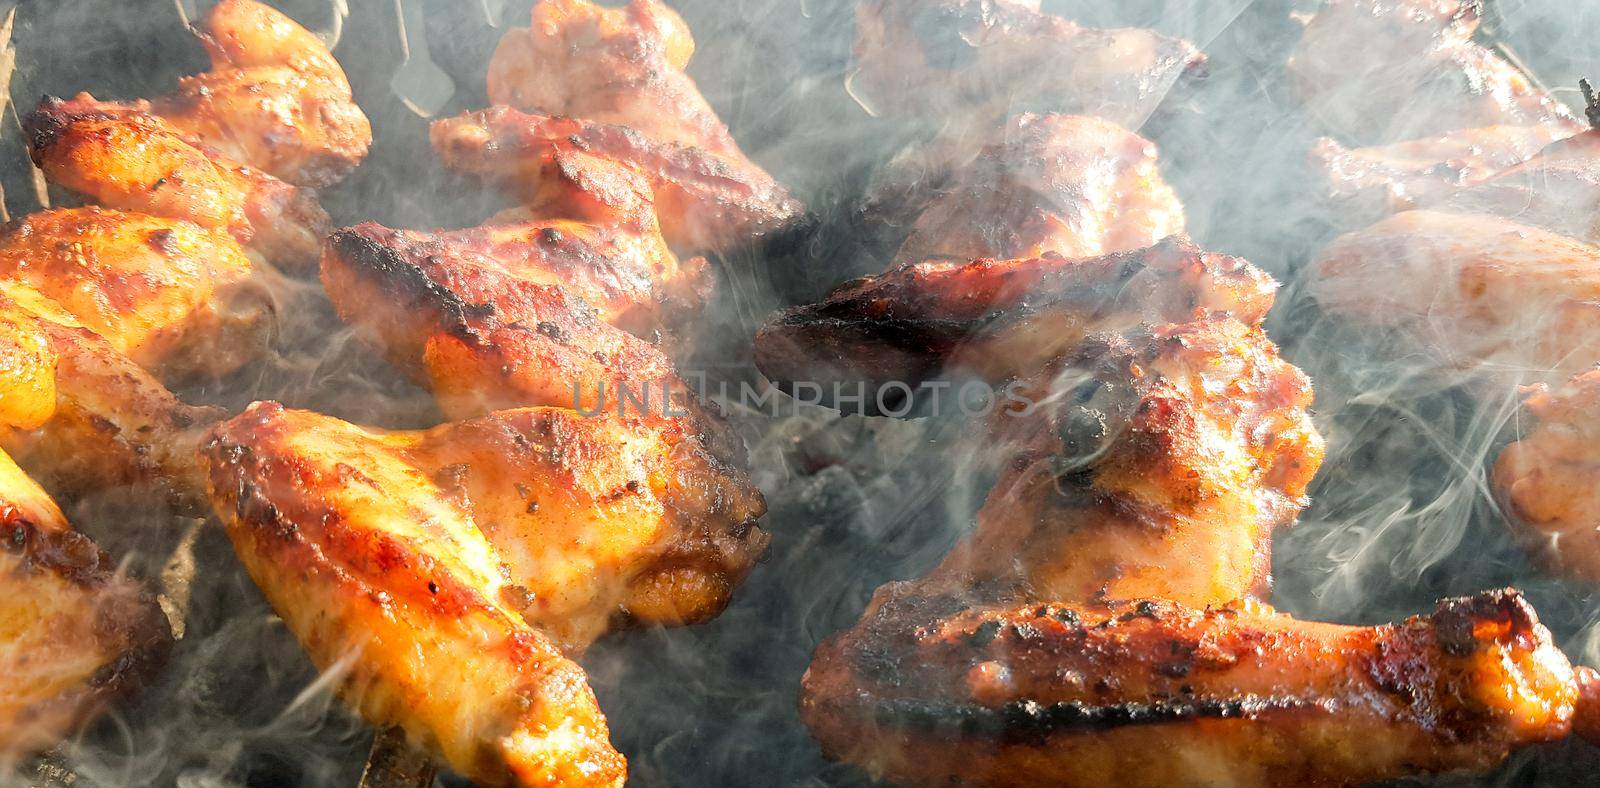 Delicious juicy grilled chicken wings outdoors in smoke. BBQ Chicken Cooking Process by Roshchyn